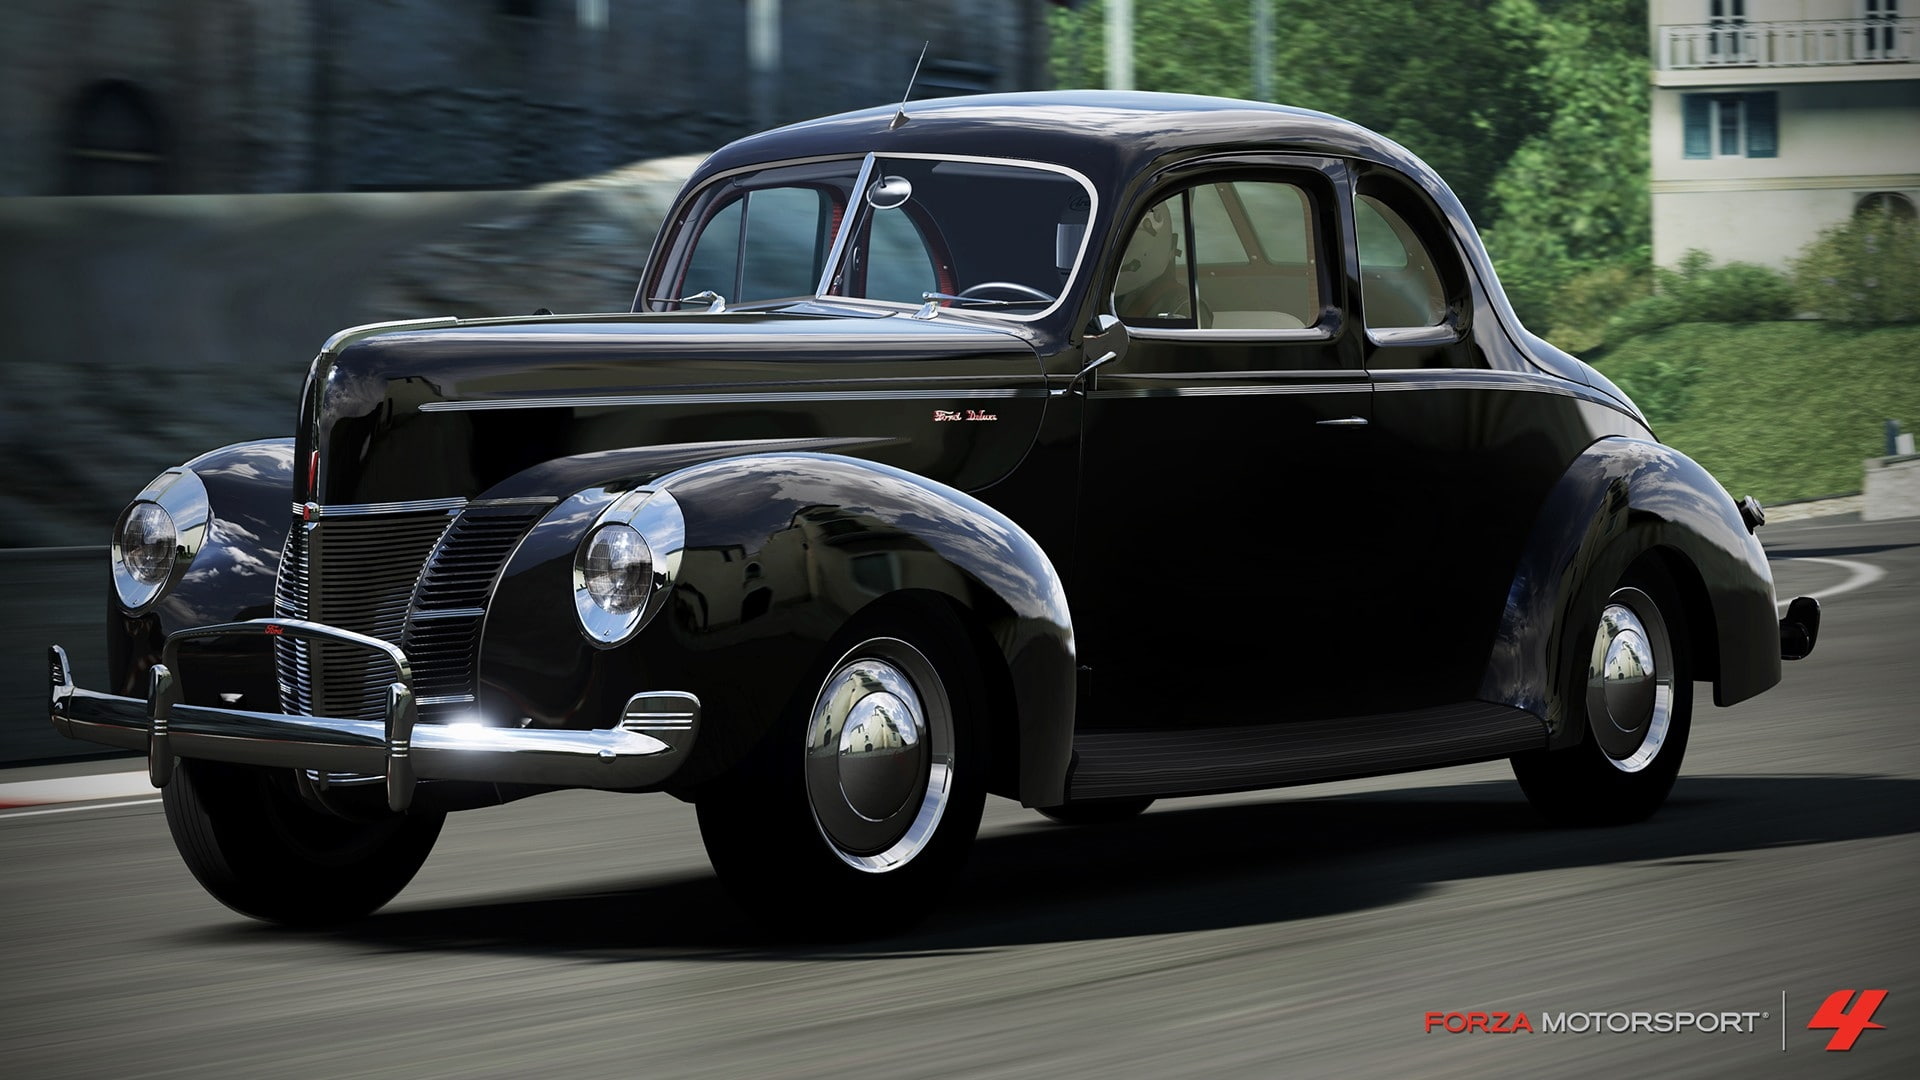 video games cars ford 1940 xbox 360 coupe forza motorsport 4 Video Games XBox HD Art